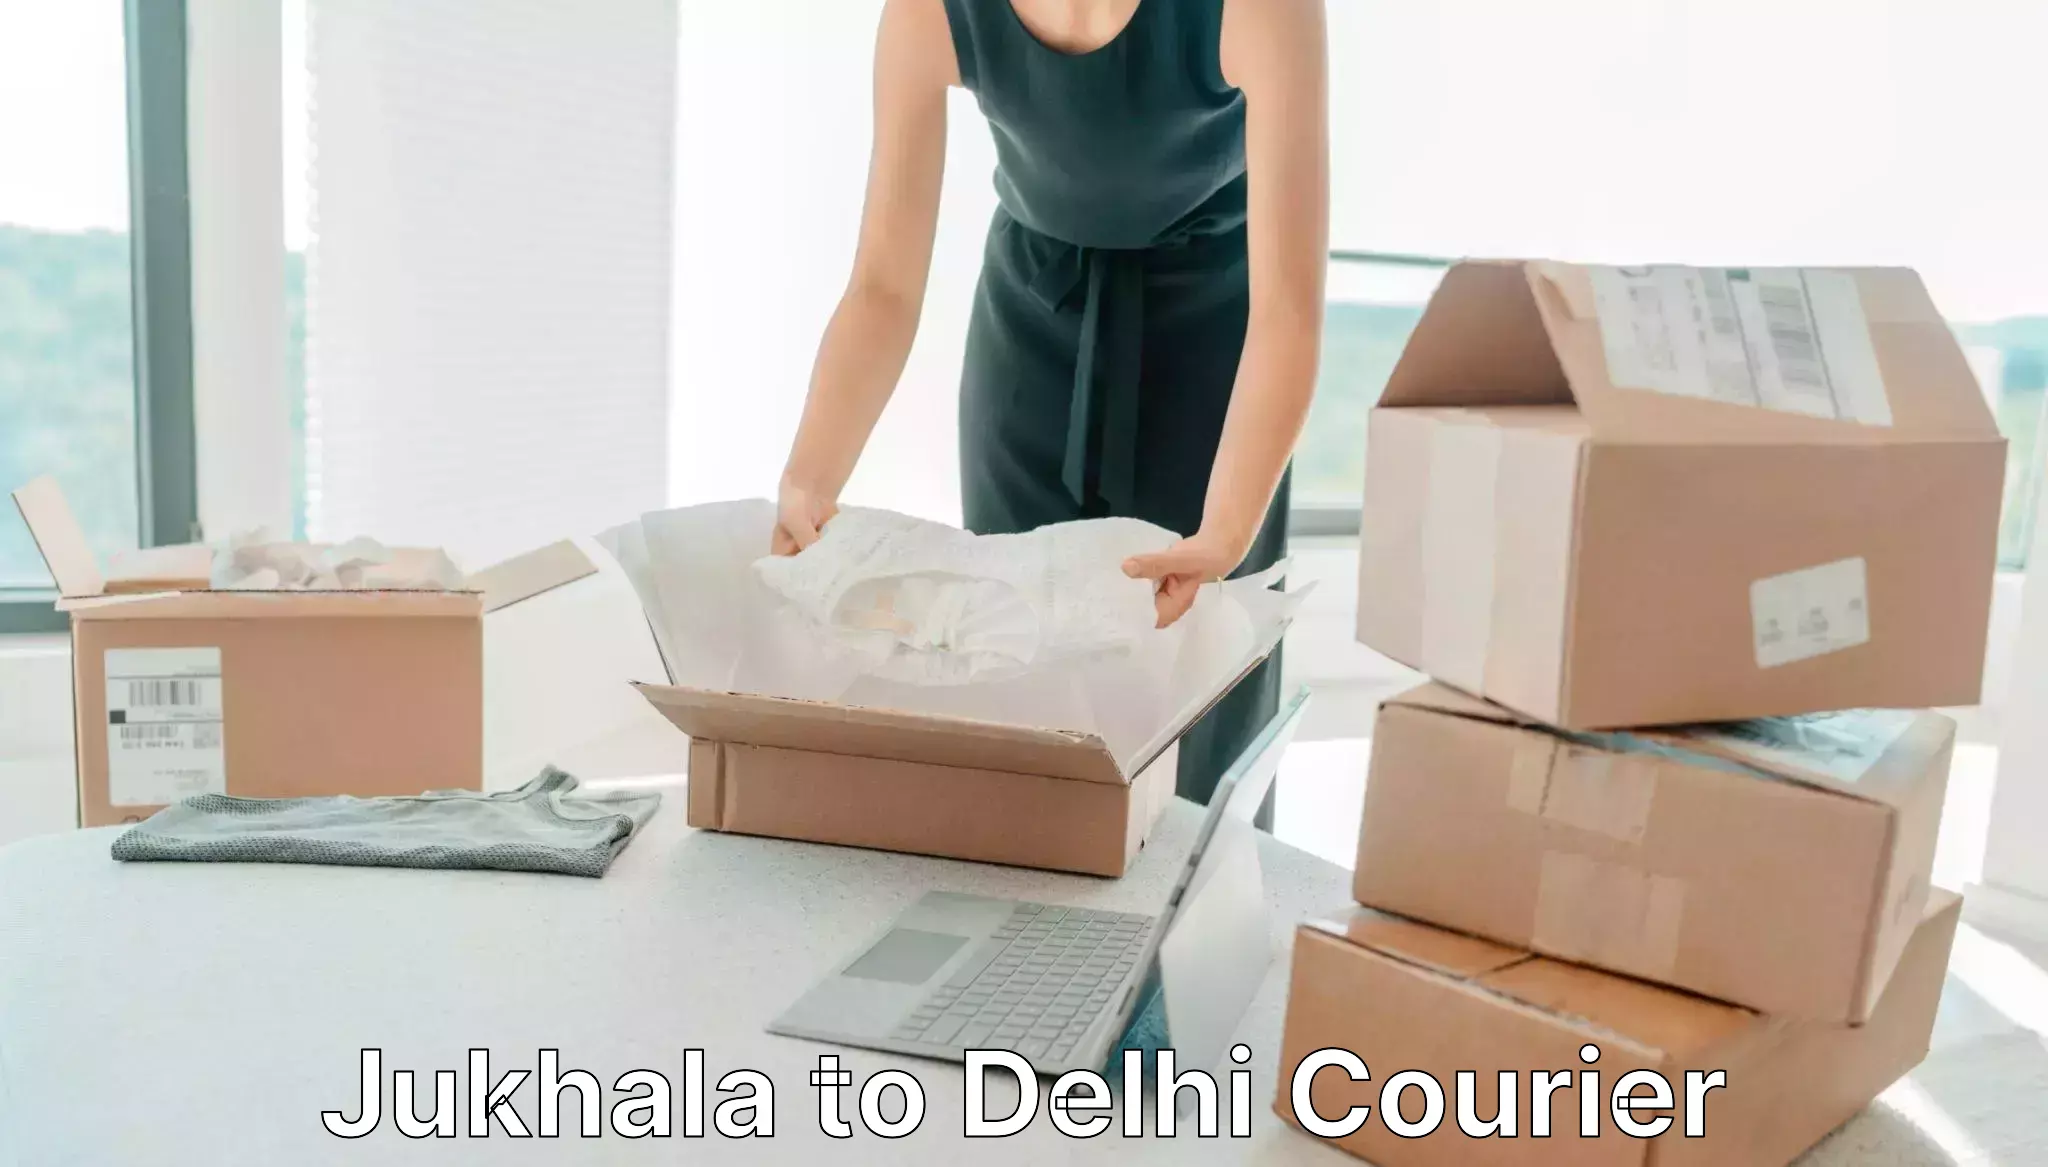 Medical delivery services Jukhala to University of Delhi